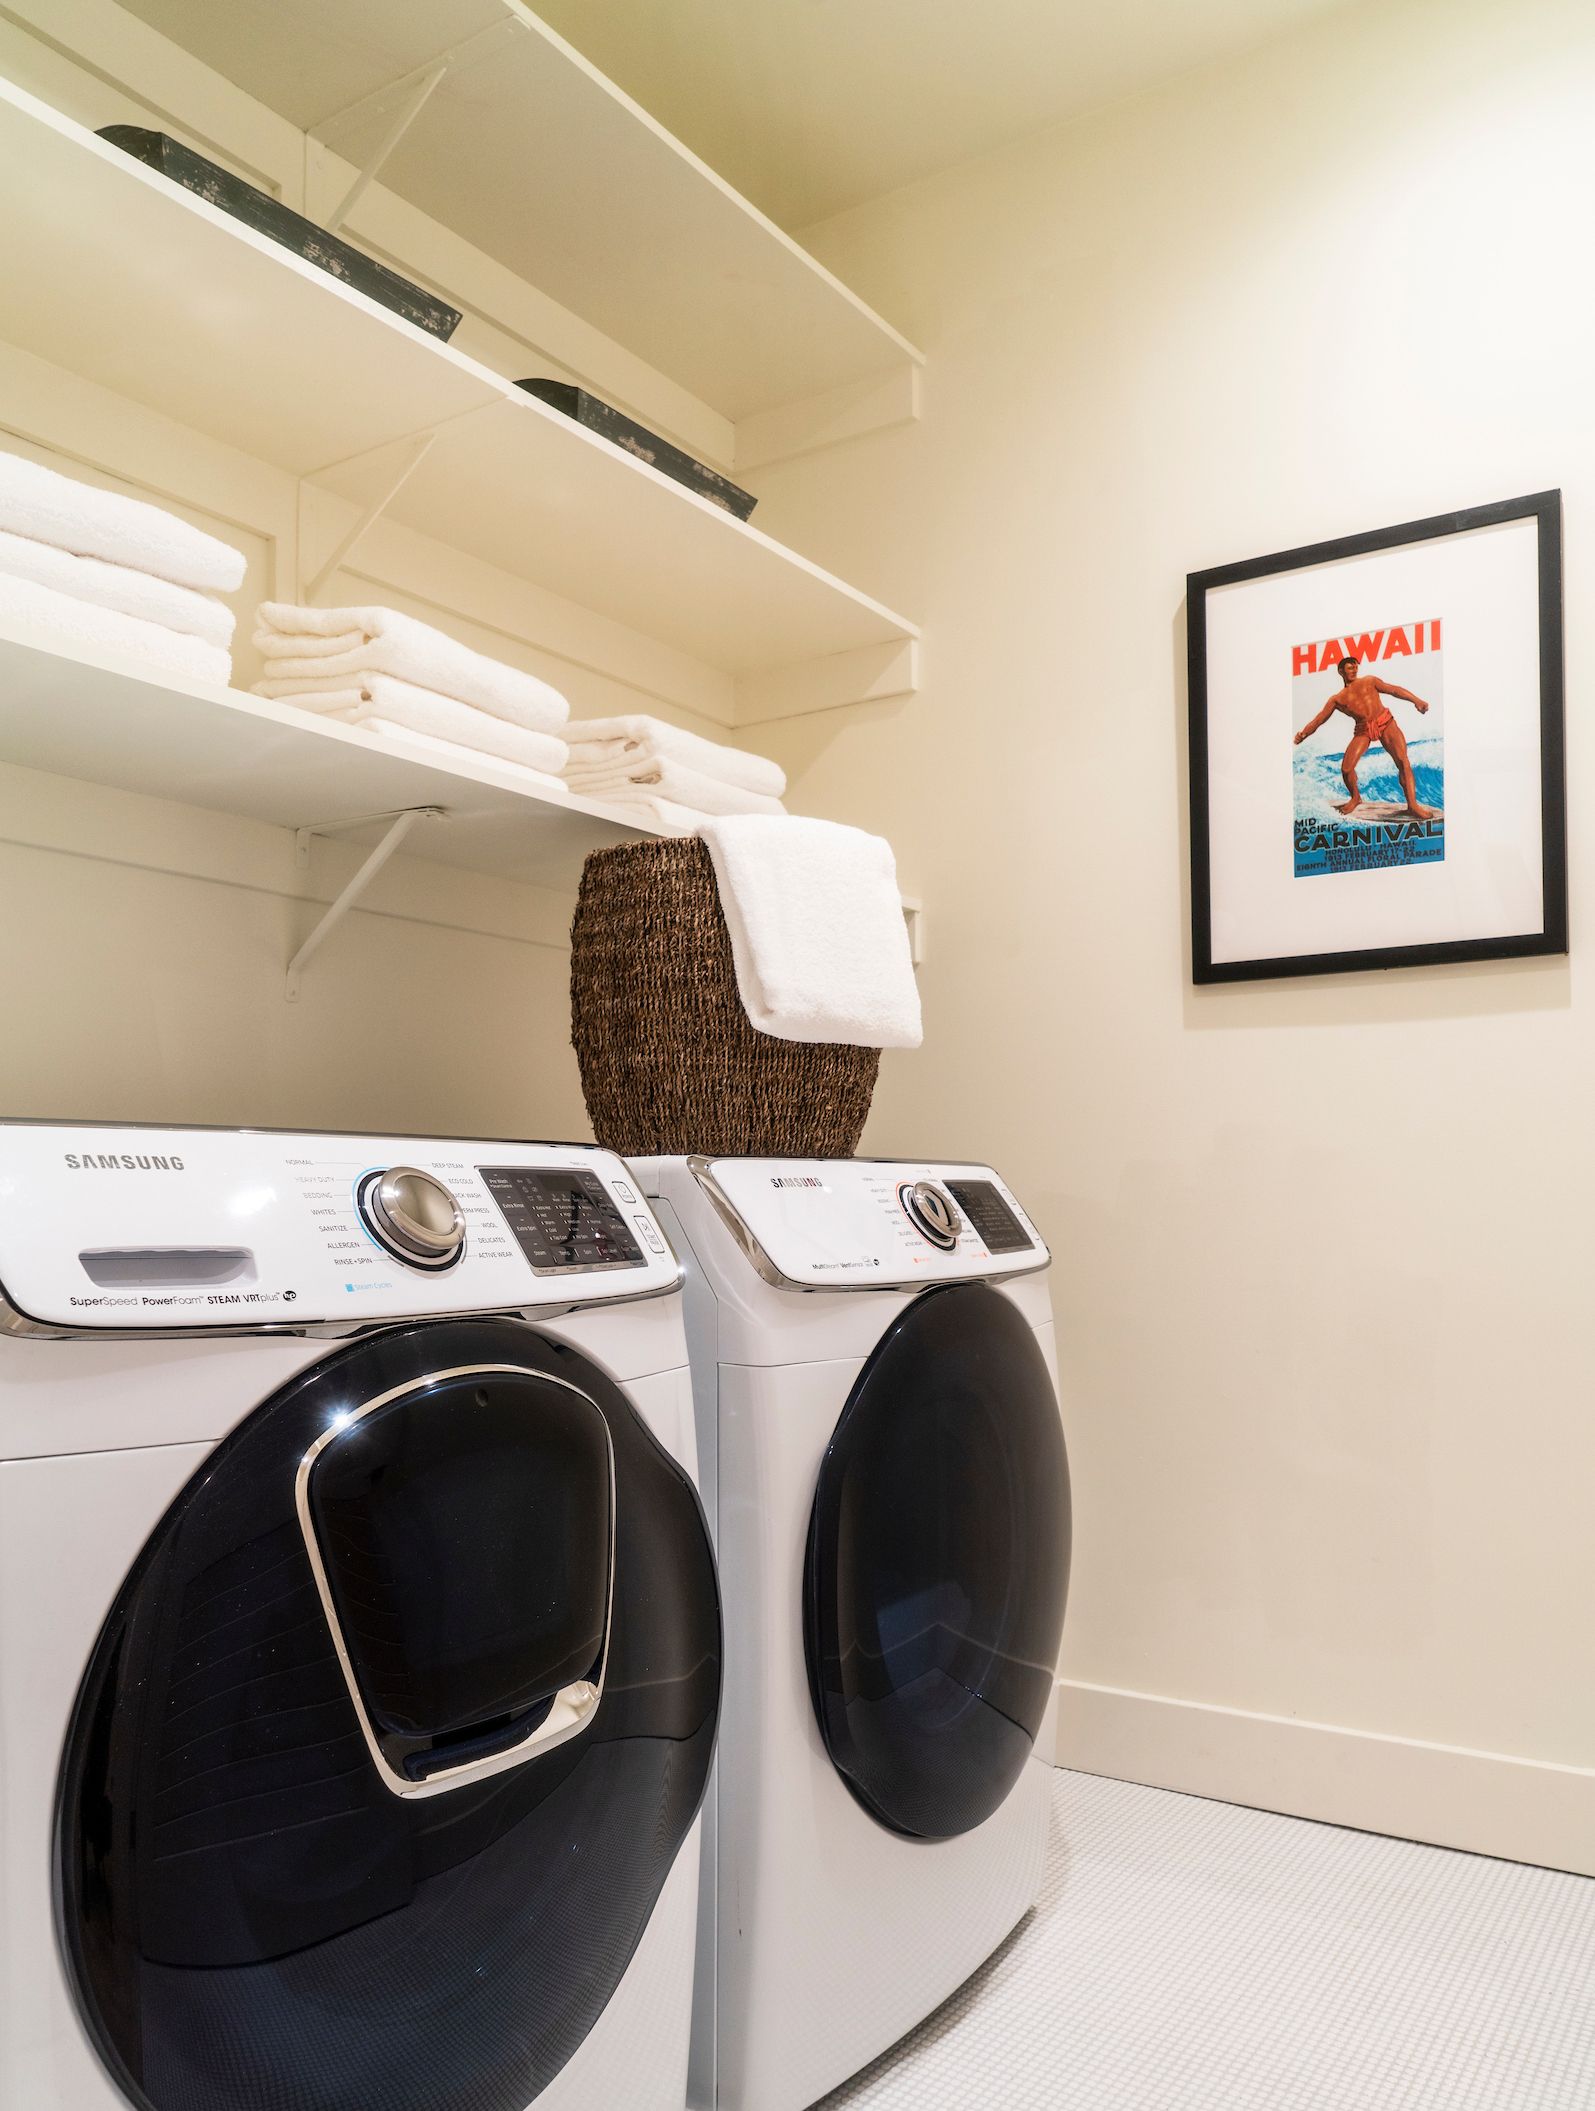 Maximus_The Pointe at Cove_4Bdrm_In Home Laundry Full Size Washer and Dryer_1207_184026.jpg